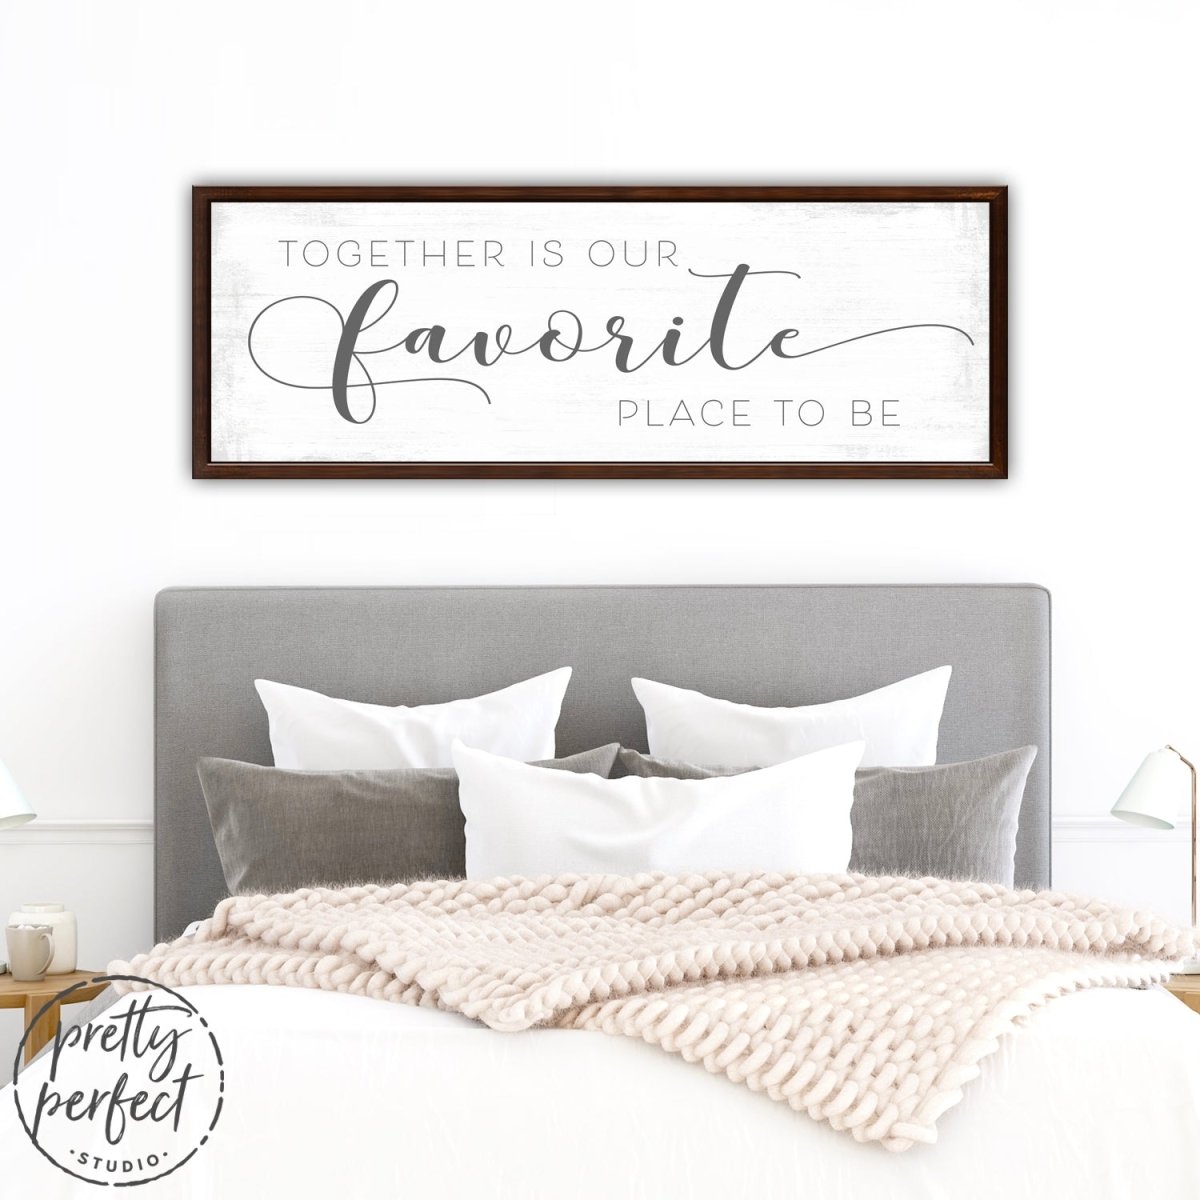 Together Is Our Favorite Place To Be Sign on Wall Above Bed - Pretty Perfect Studio